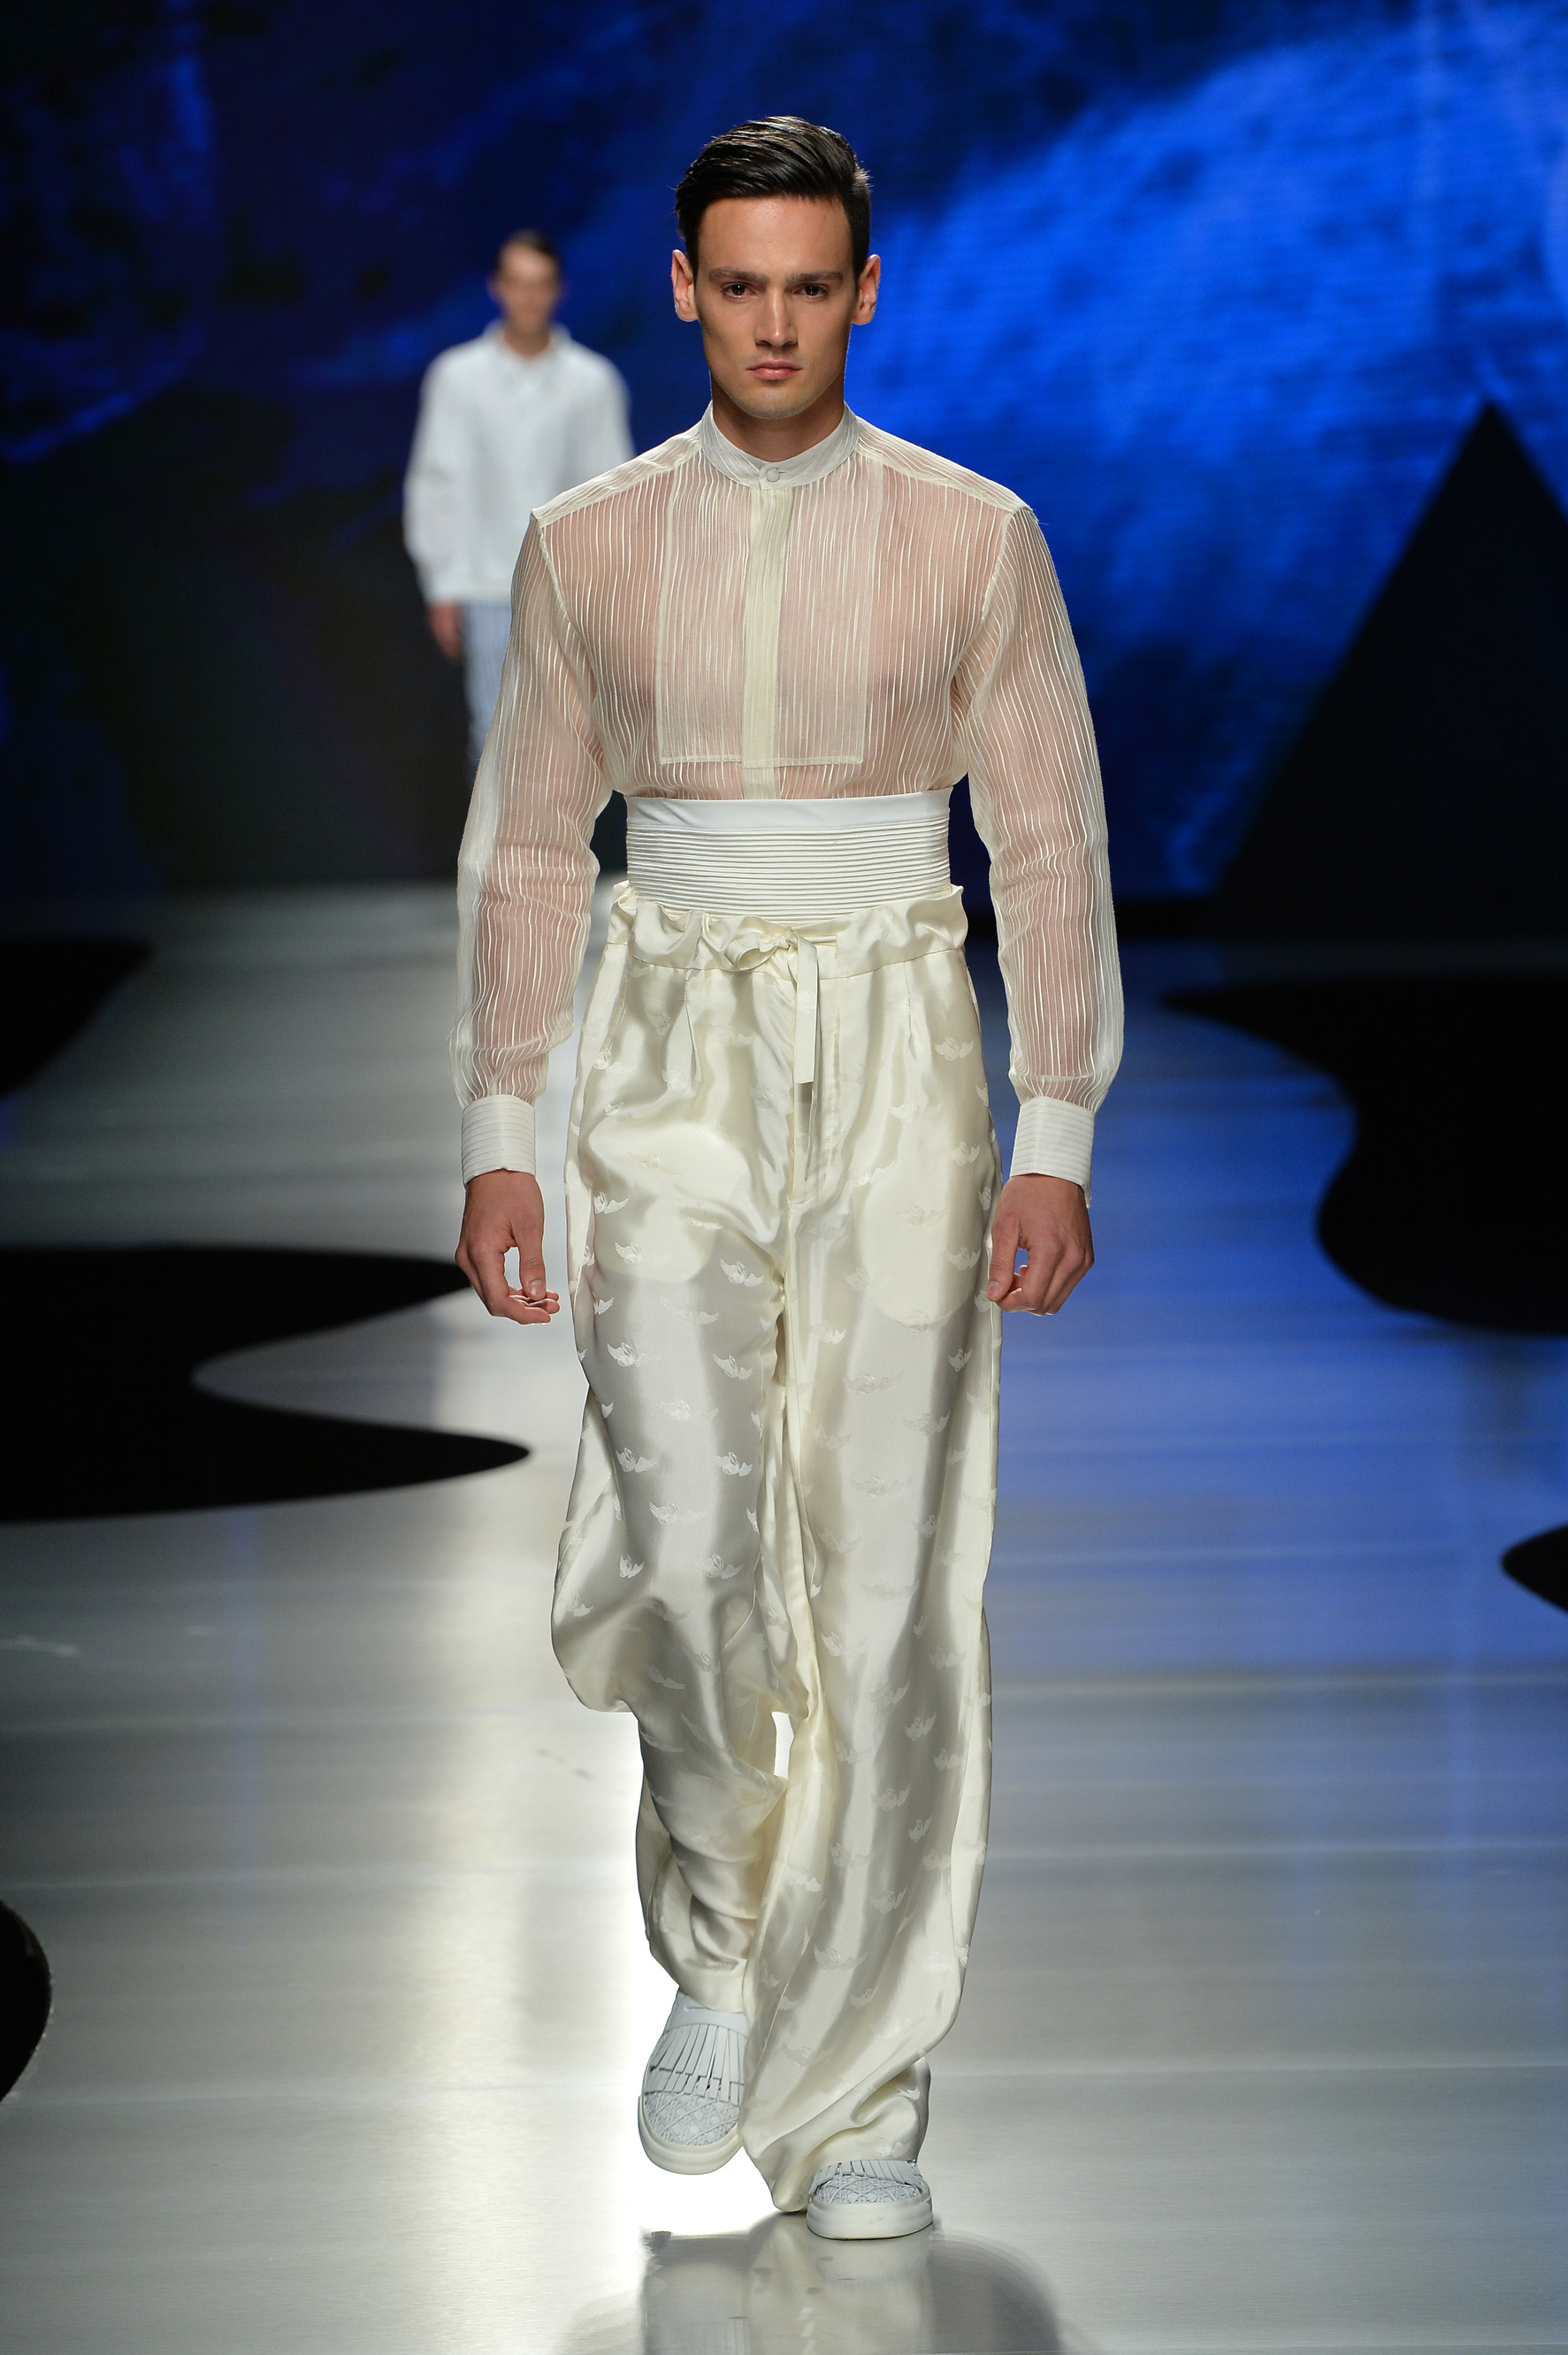 7 Unforgettable Looks from La Perla's Men's Collection - Daily Front Row